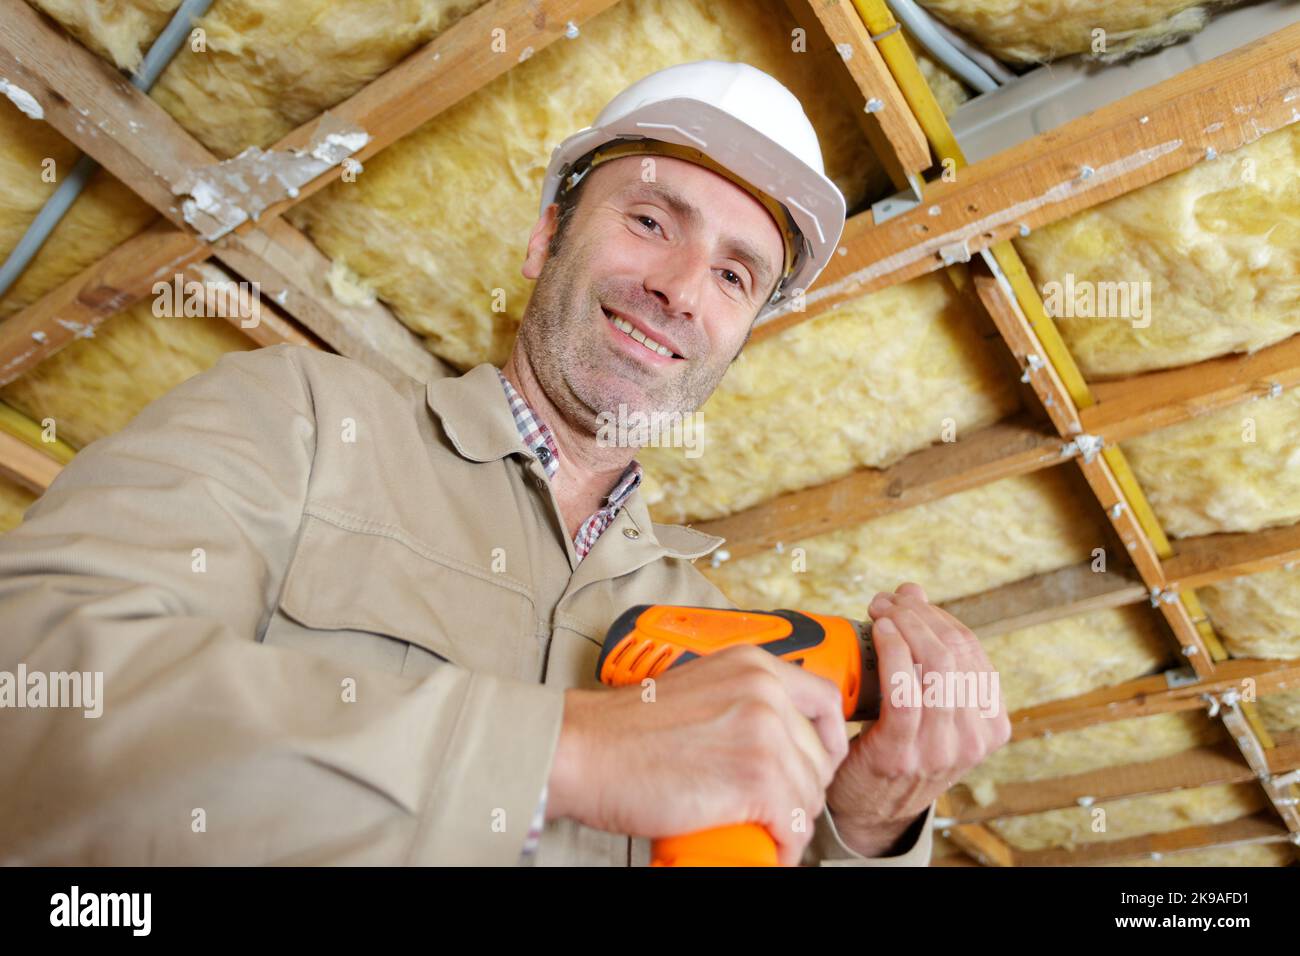 a carpenter drilling wooden plank Stock Photo